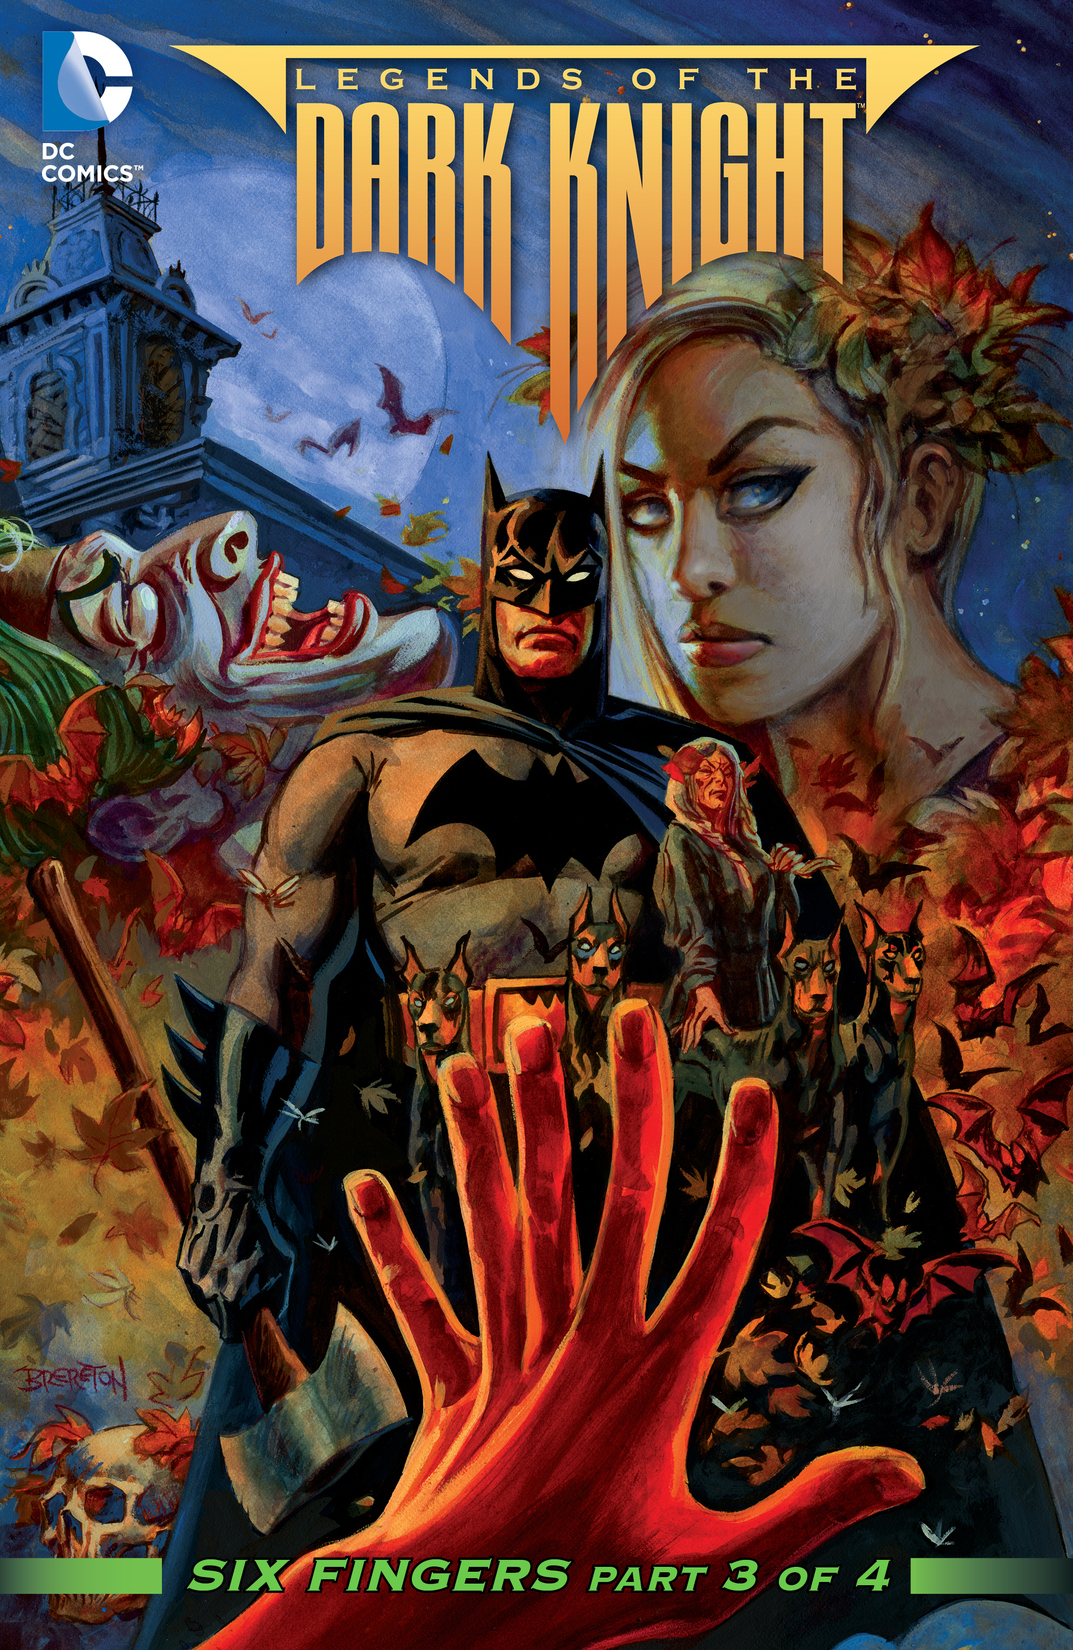 Legends of the Dark Knight #87 preview images